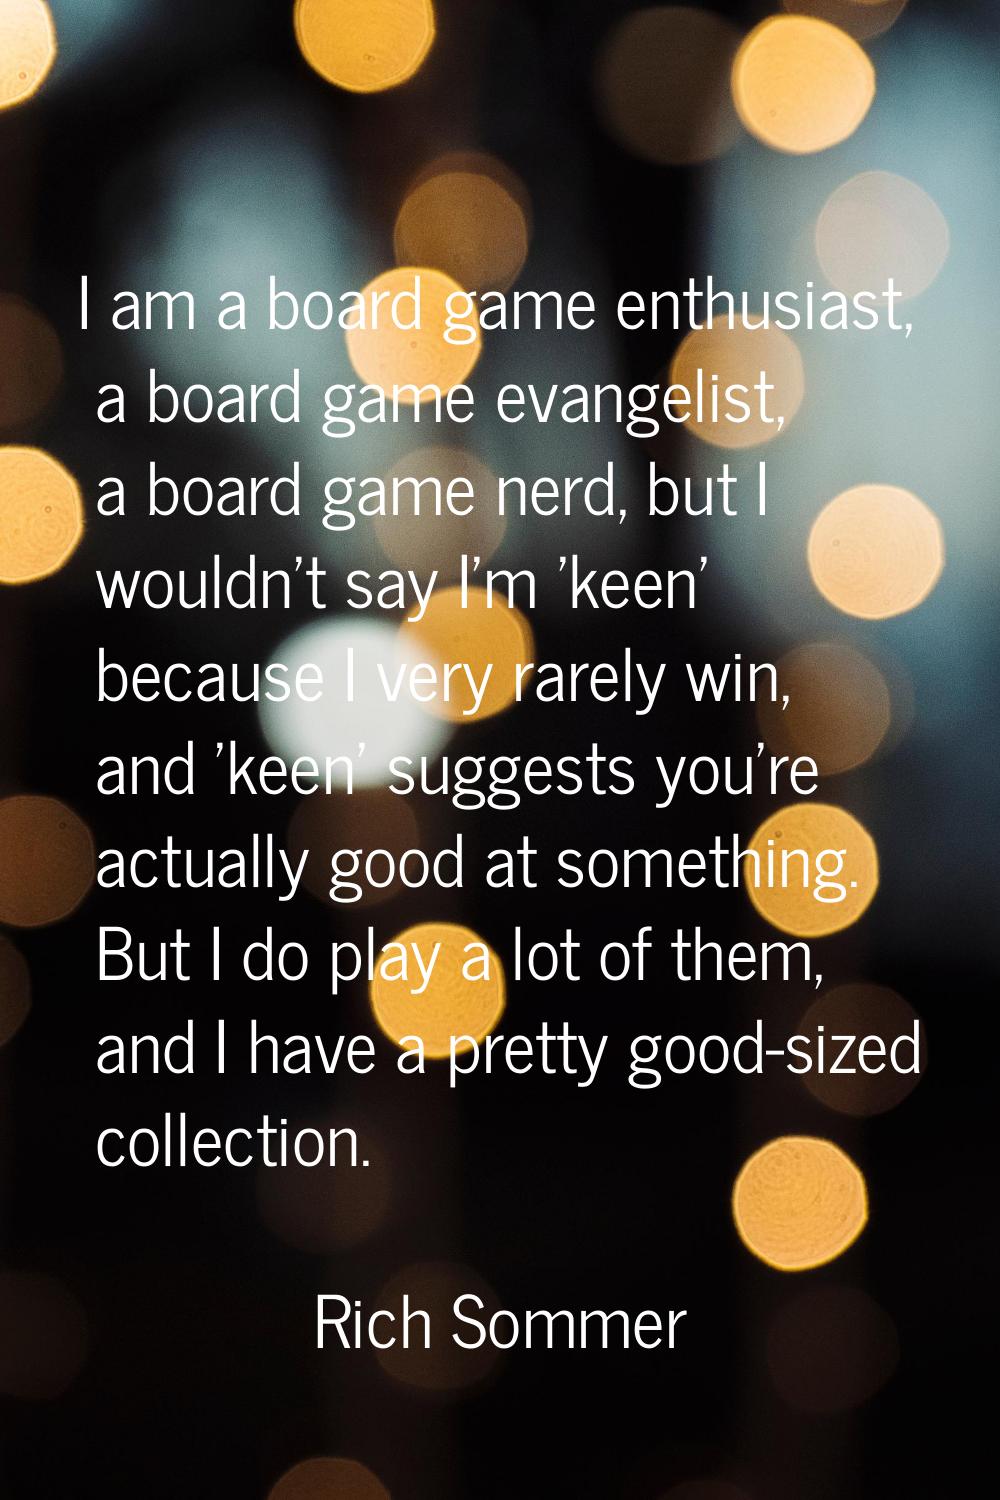 I am a board game enthusiast, a board game evangelist, a board game nerd, but I wouldn't say I'm 'k